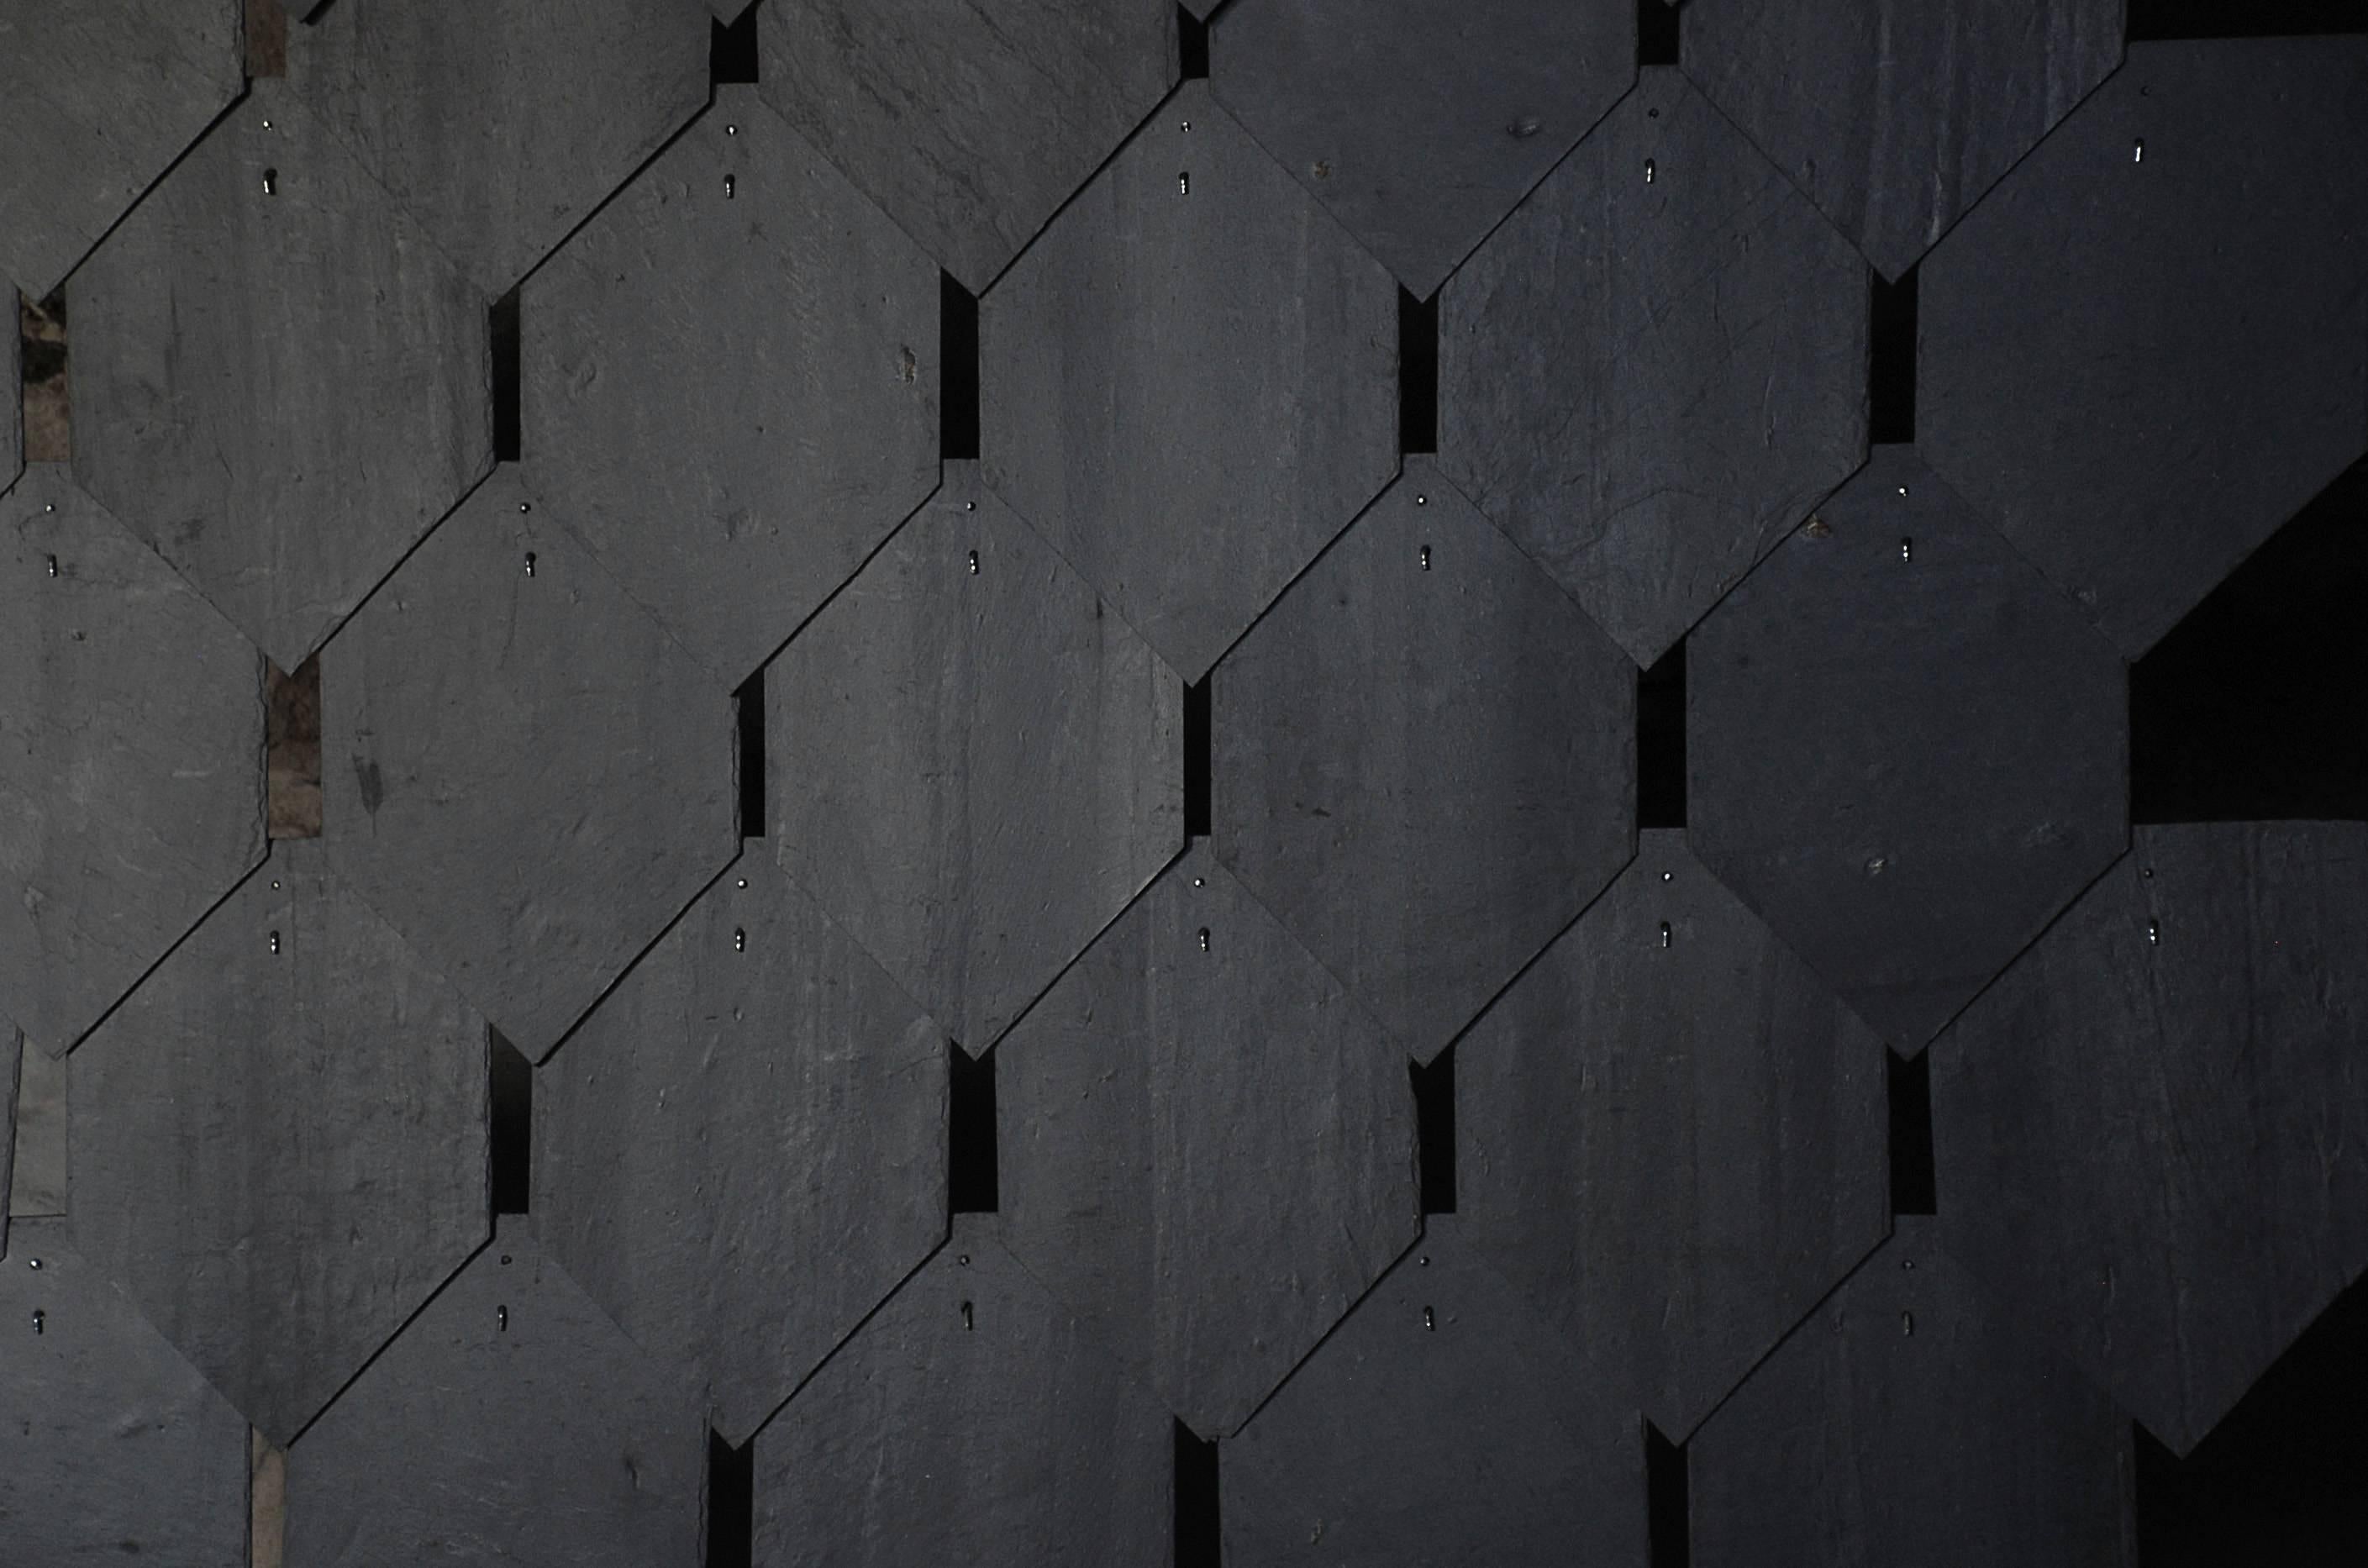 Pudique.
screen.
Frederic Saulou.
Materials: Trélazé black slate, waxed metal structure.
Dimensions: 165 x 145 cm.

Edition of 8.
Signed and Numbered.

“While wandering in the streets I have been observing buildings,
construction toward